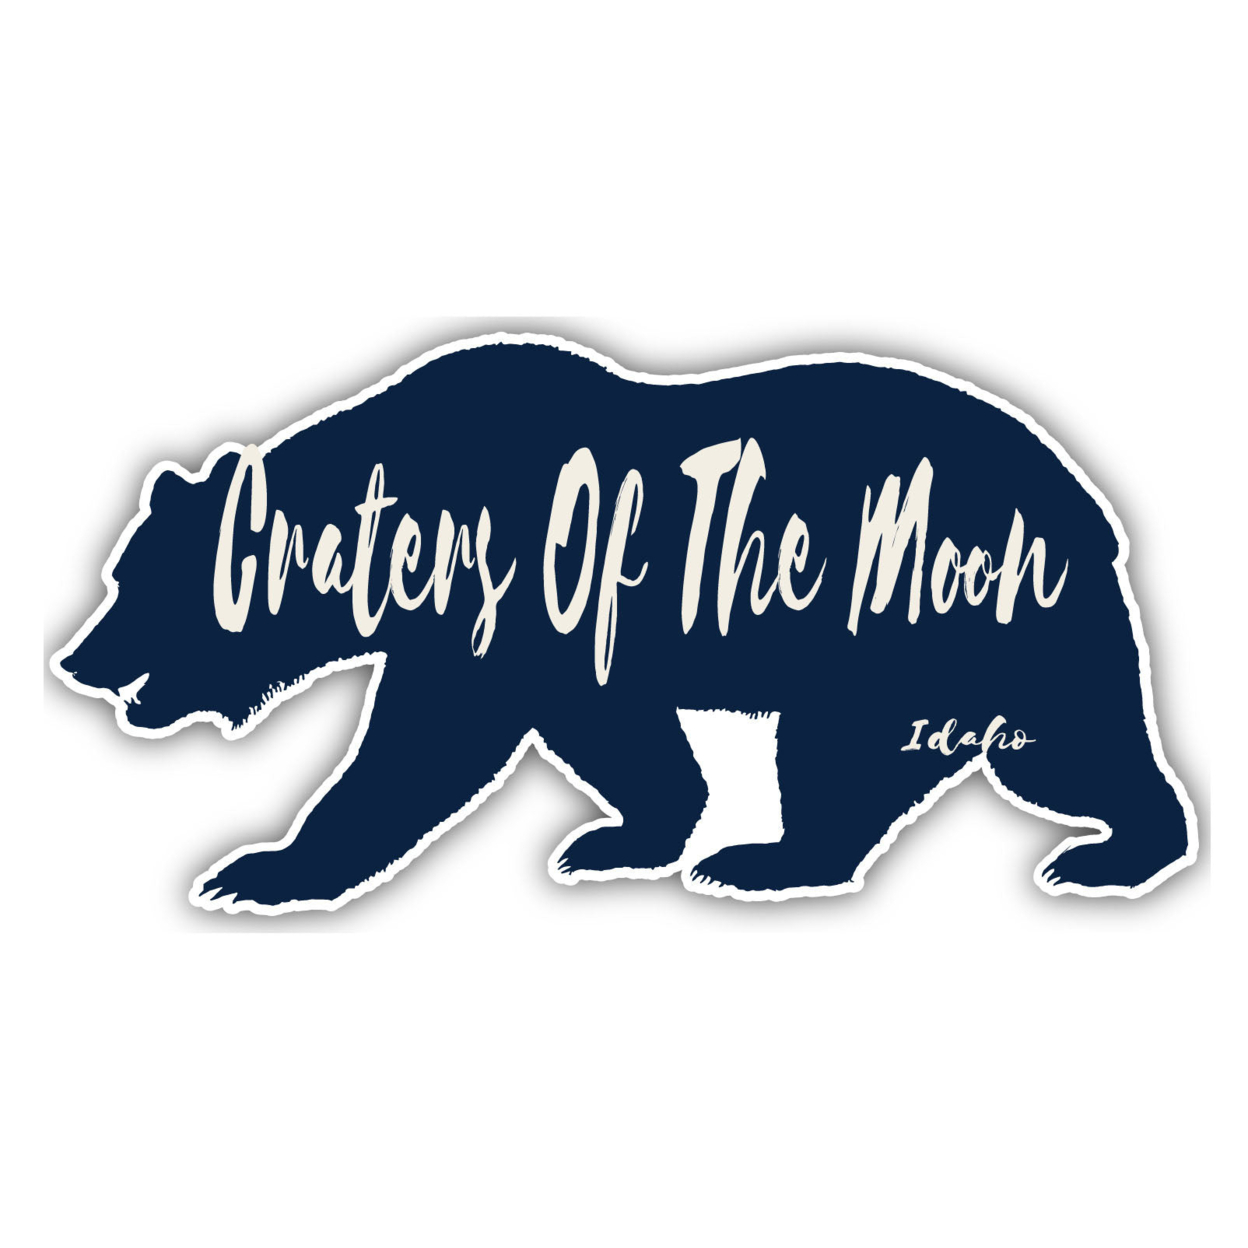 Craters Of The Moon Idaho Souvenir Decorative Stickers (Choose Theme And Size) - Single Unit, 12-Inch, Bear